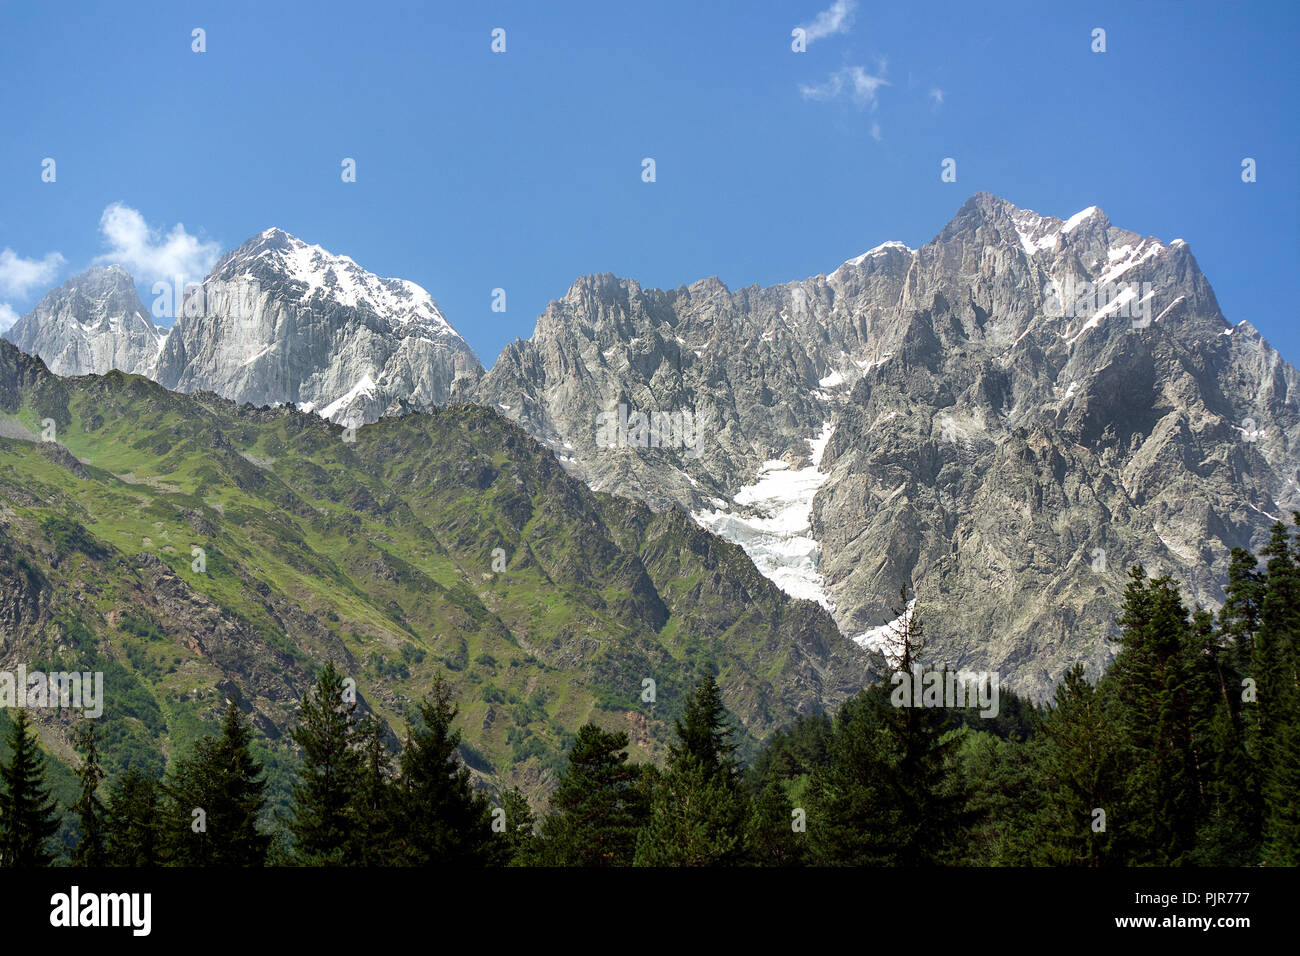 A stunning view of the peaks of the Caucasus Mountains in the Savanti region, Georgia. Stock Photo